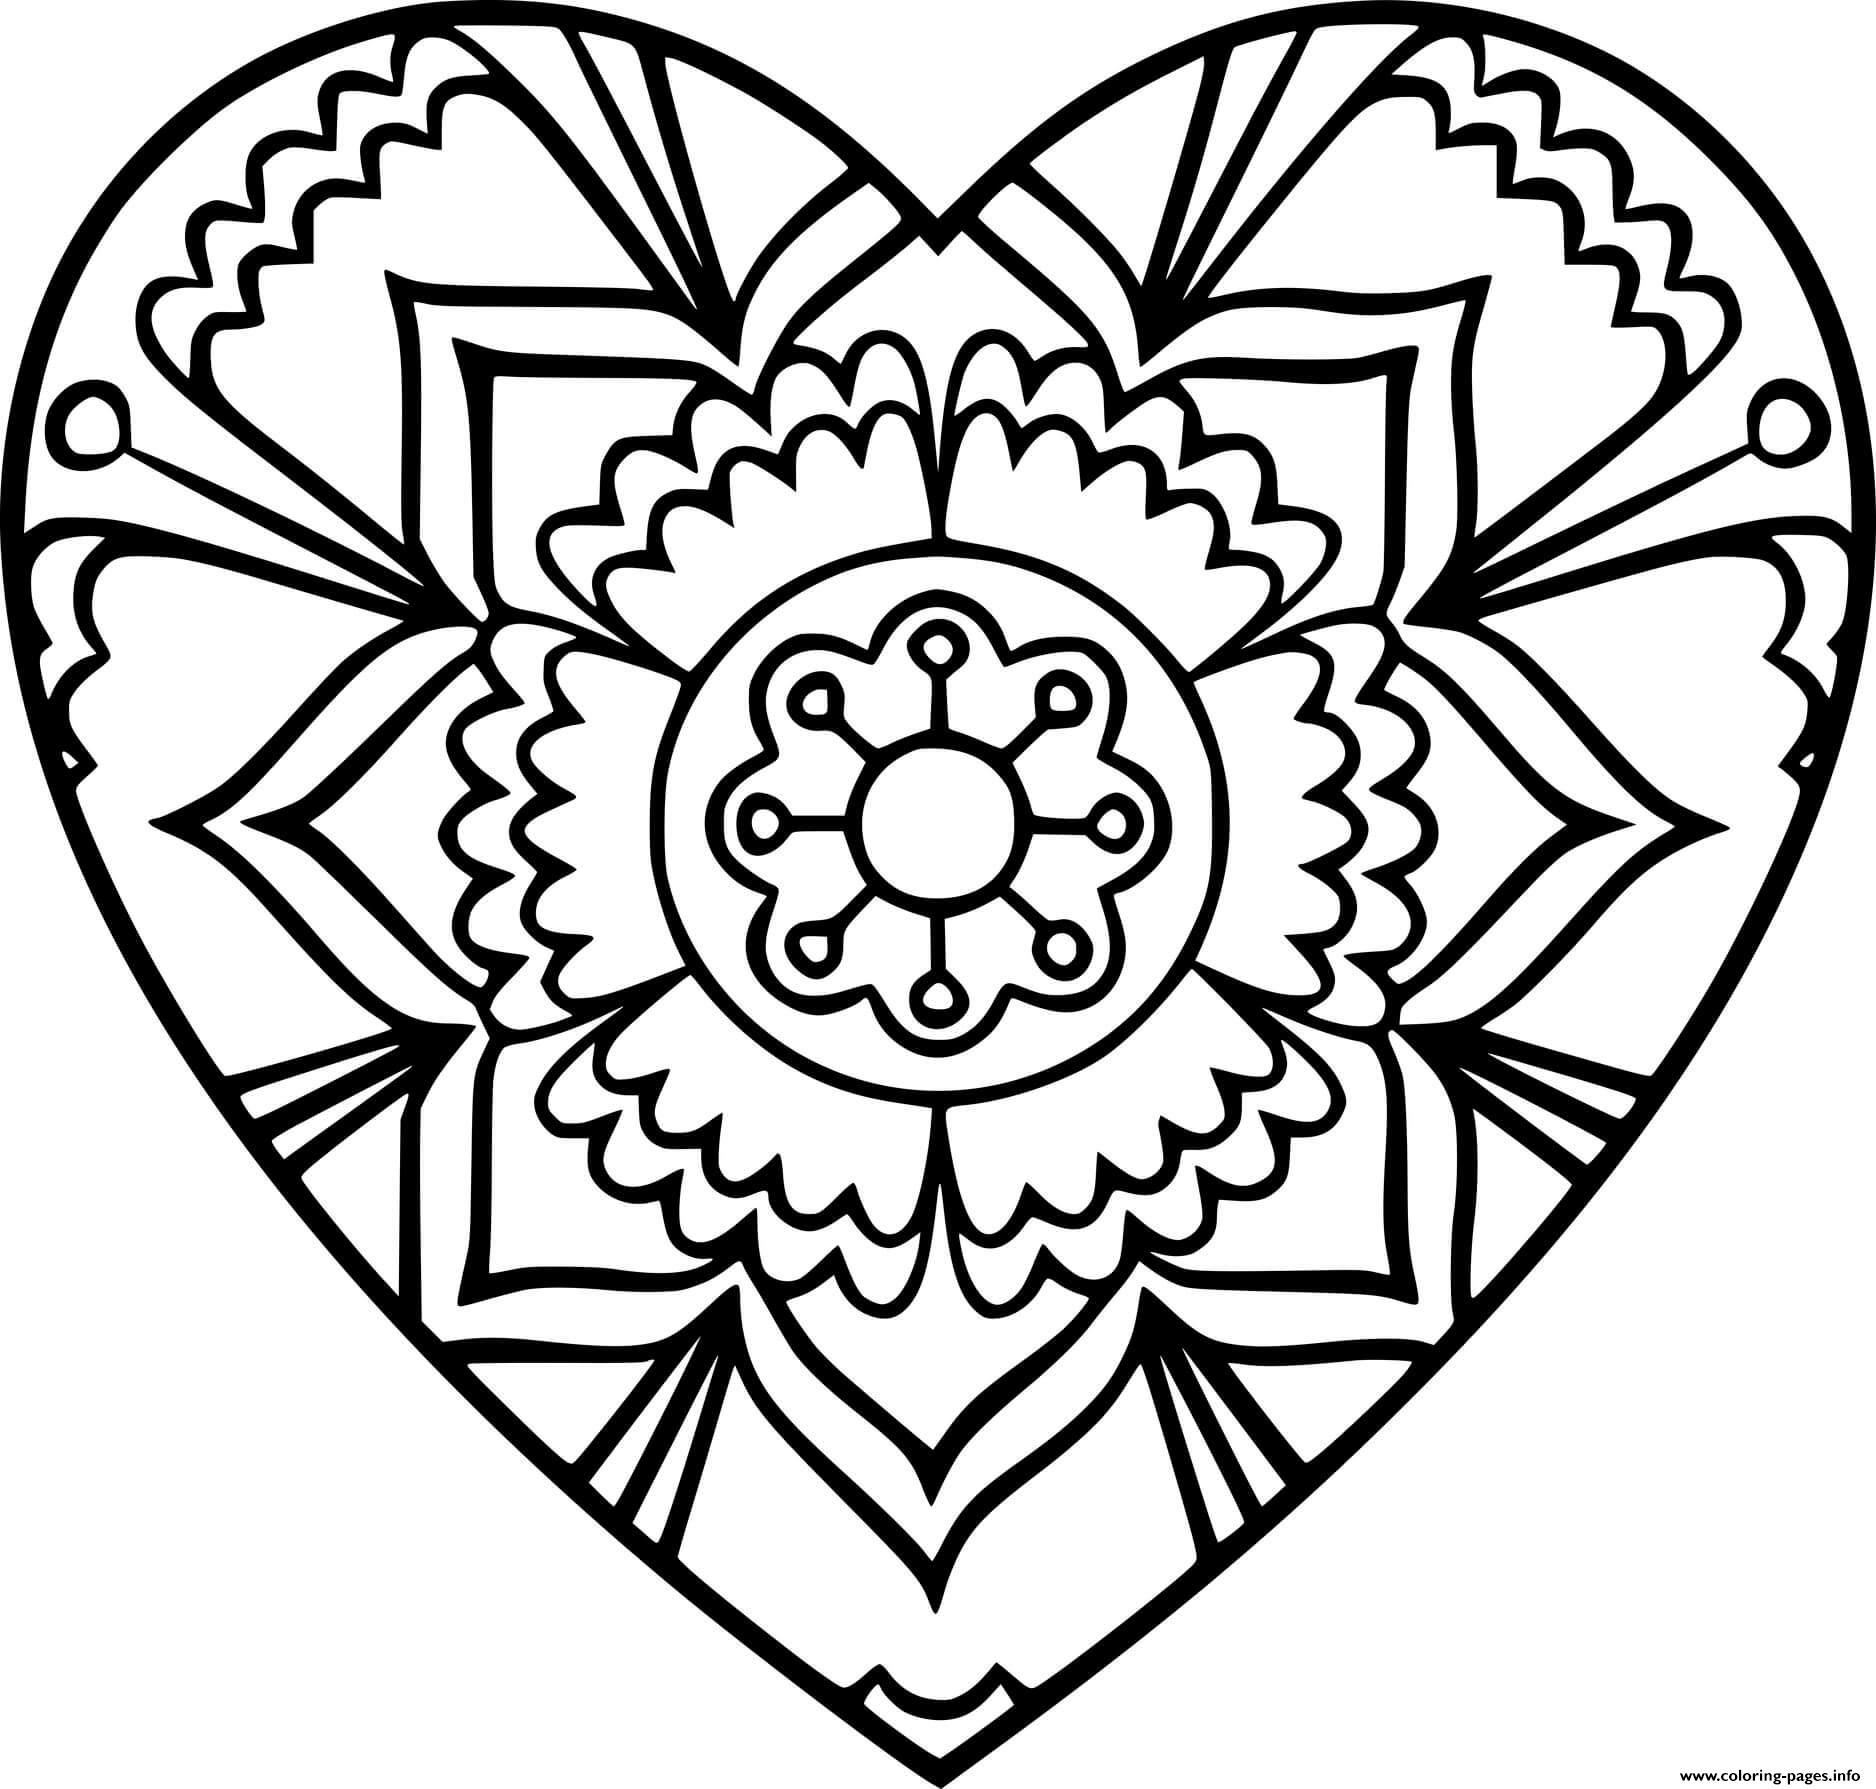 Heart With Flower Patterns coloring